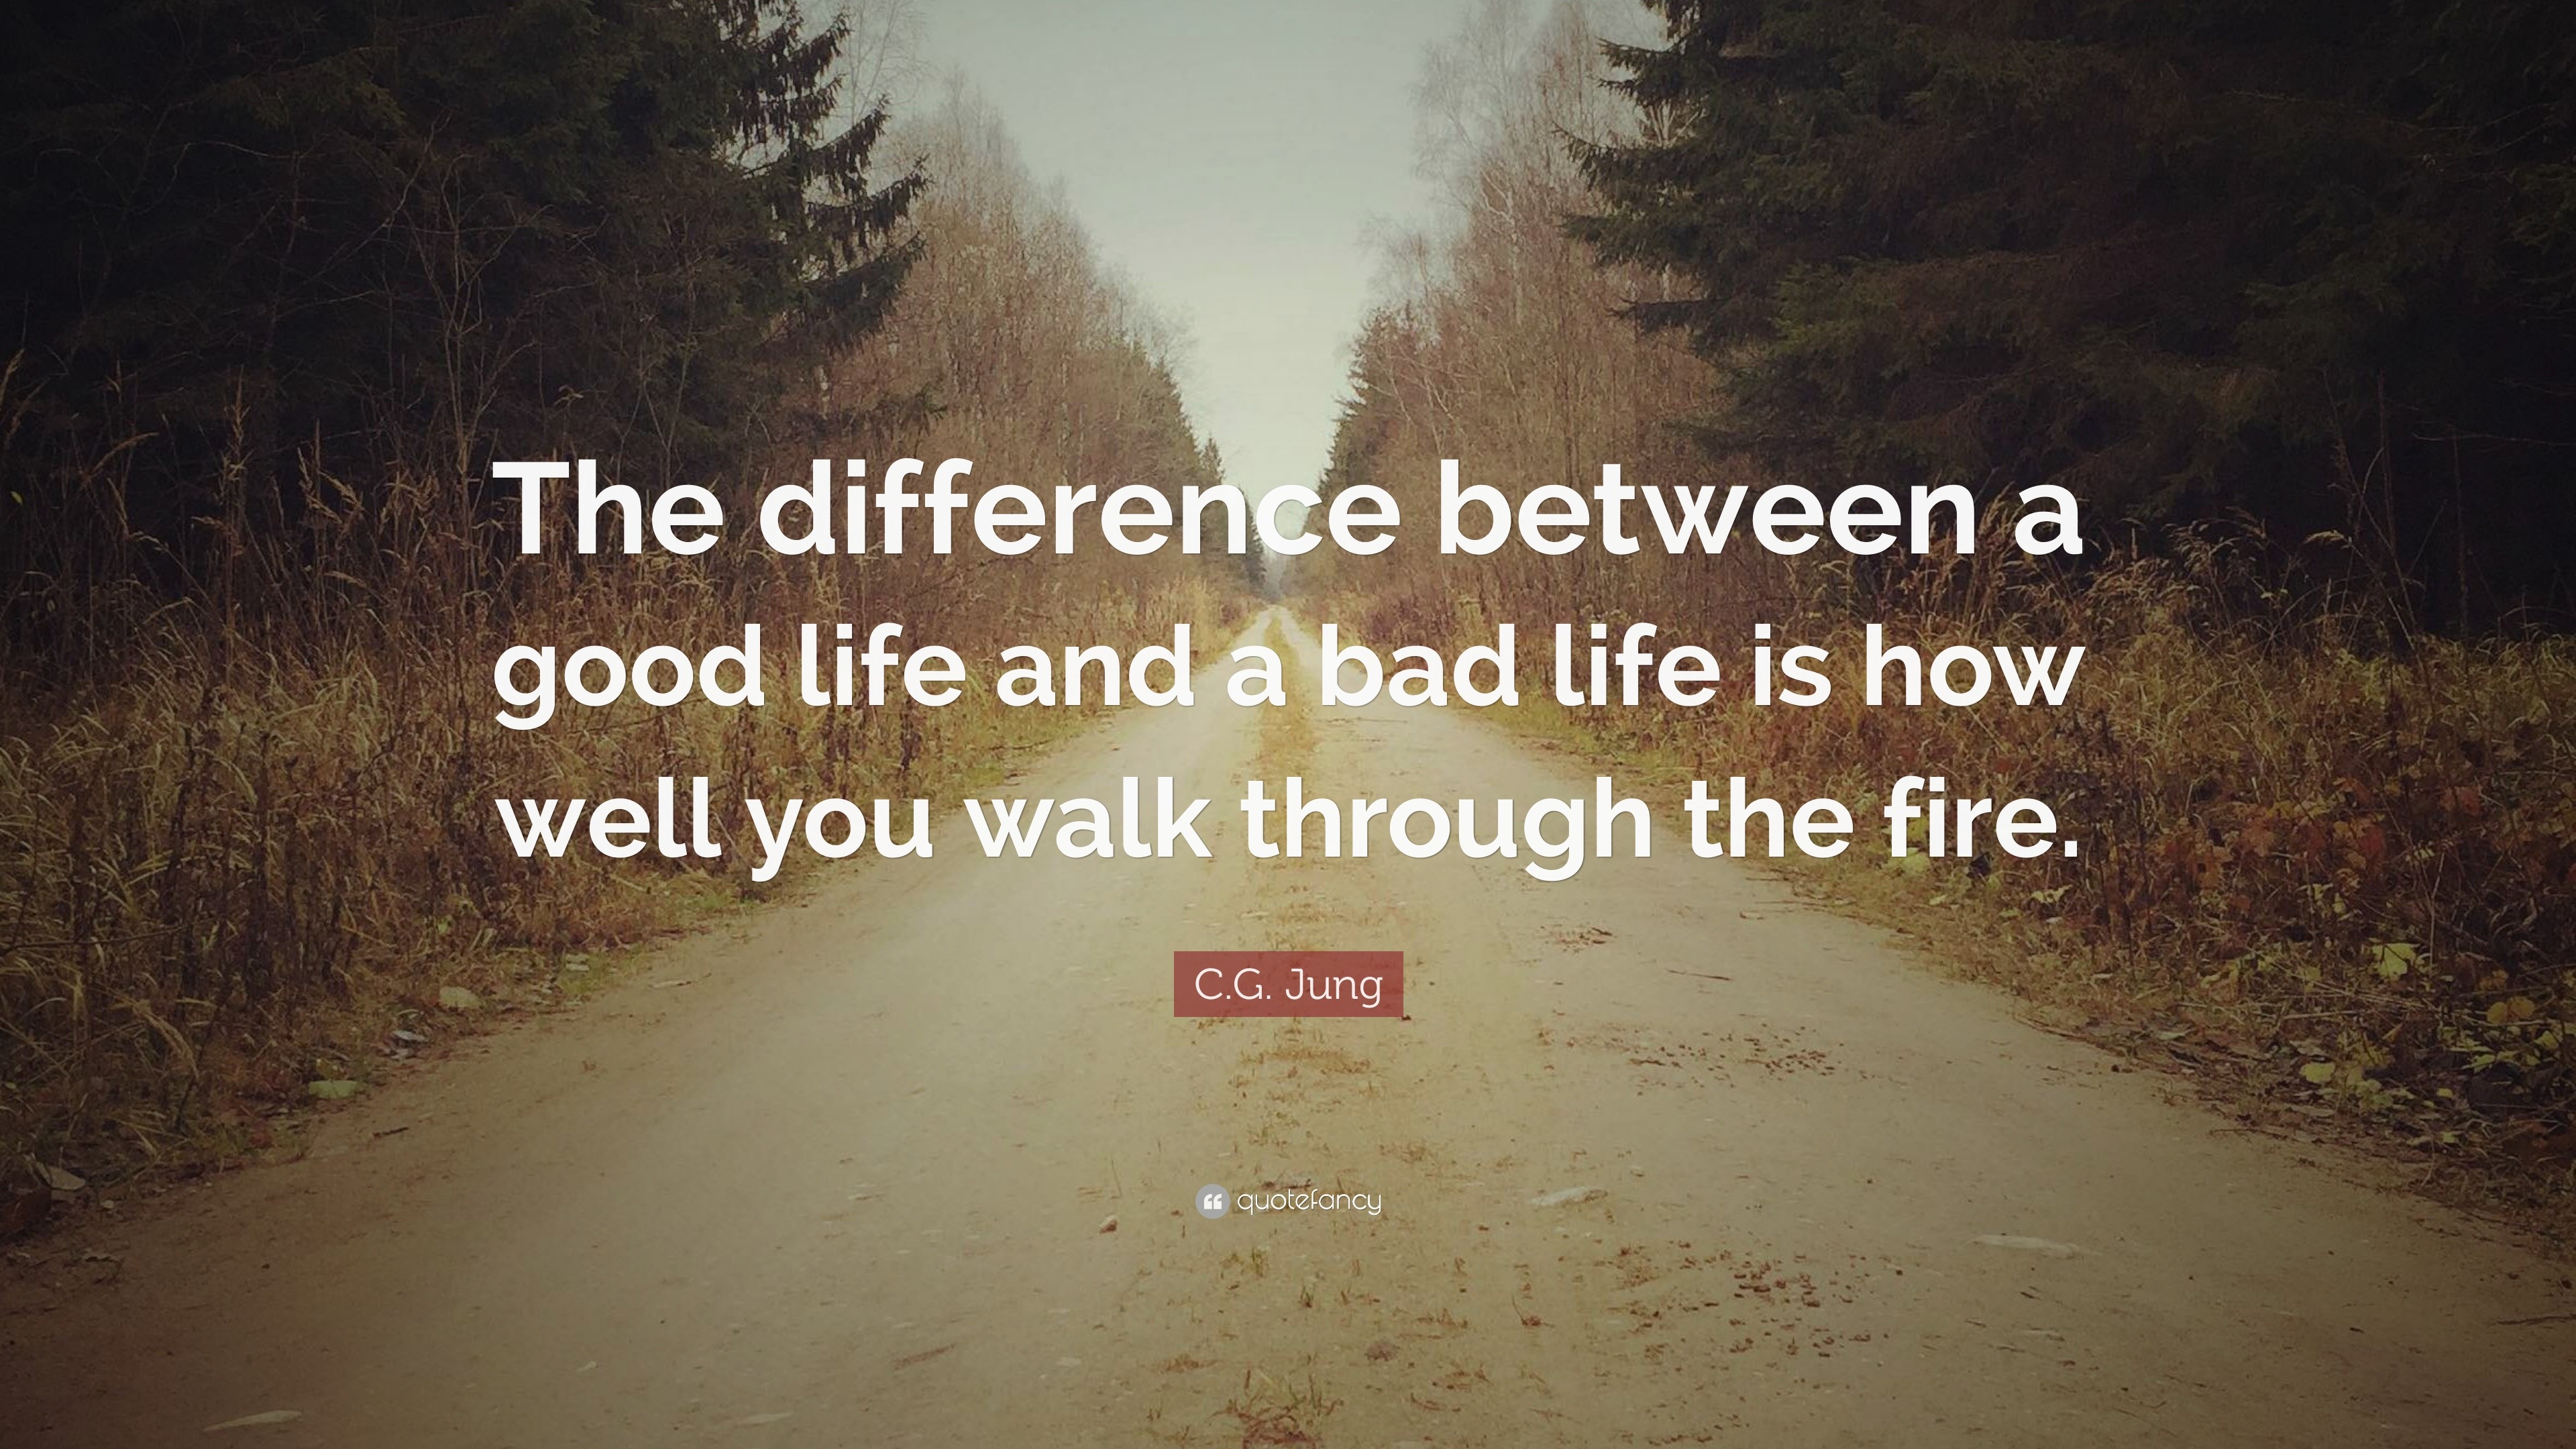 C G Jung Quote “The difference between a good life and a bad life is